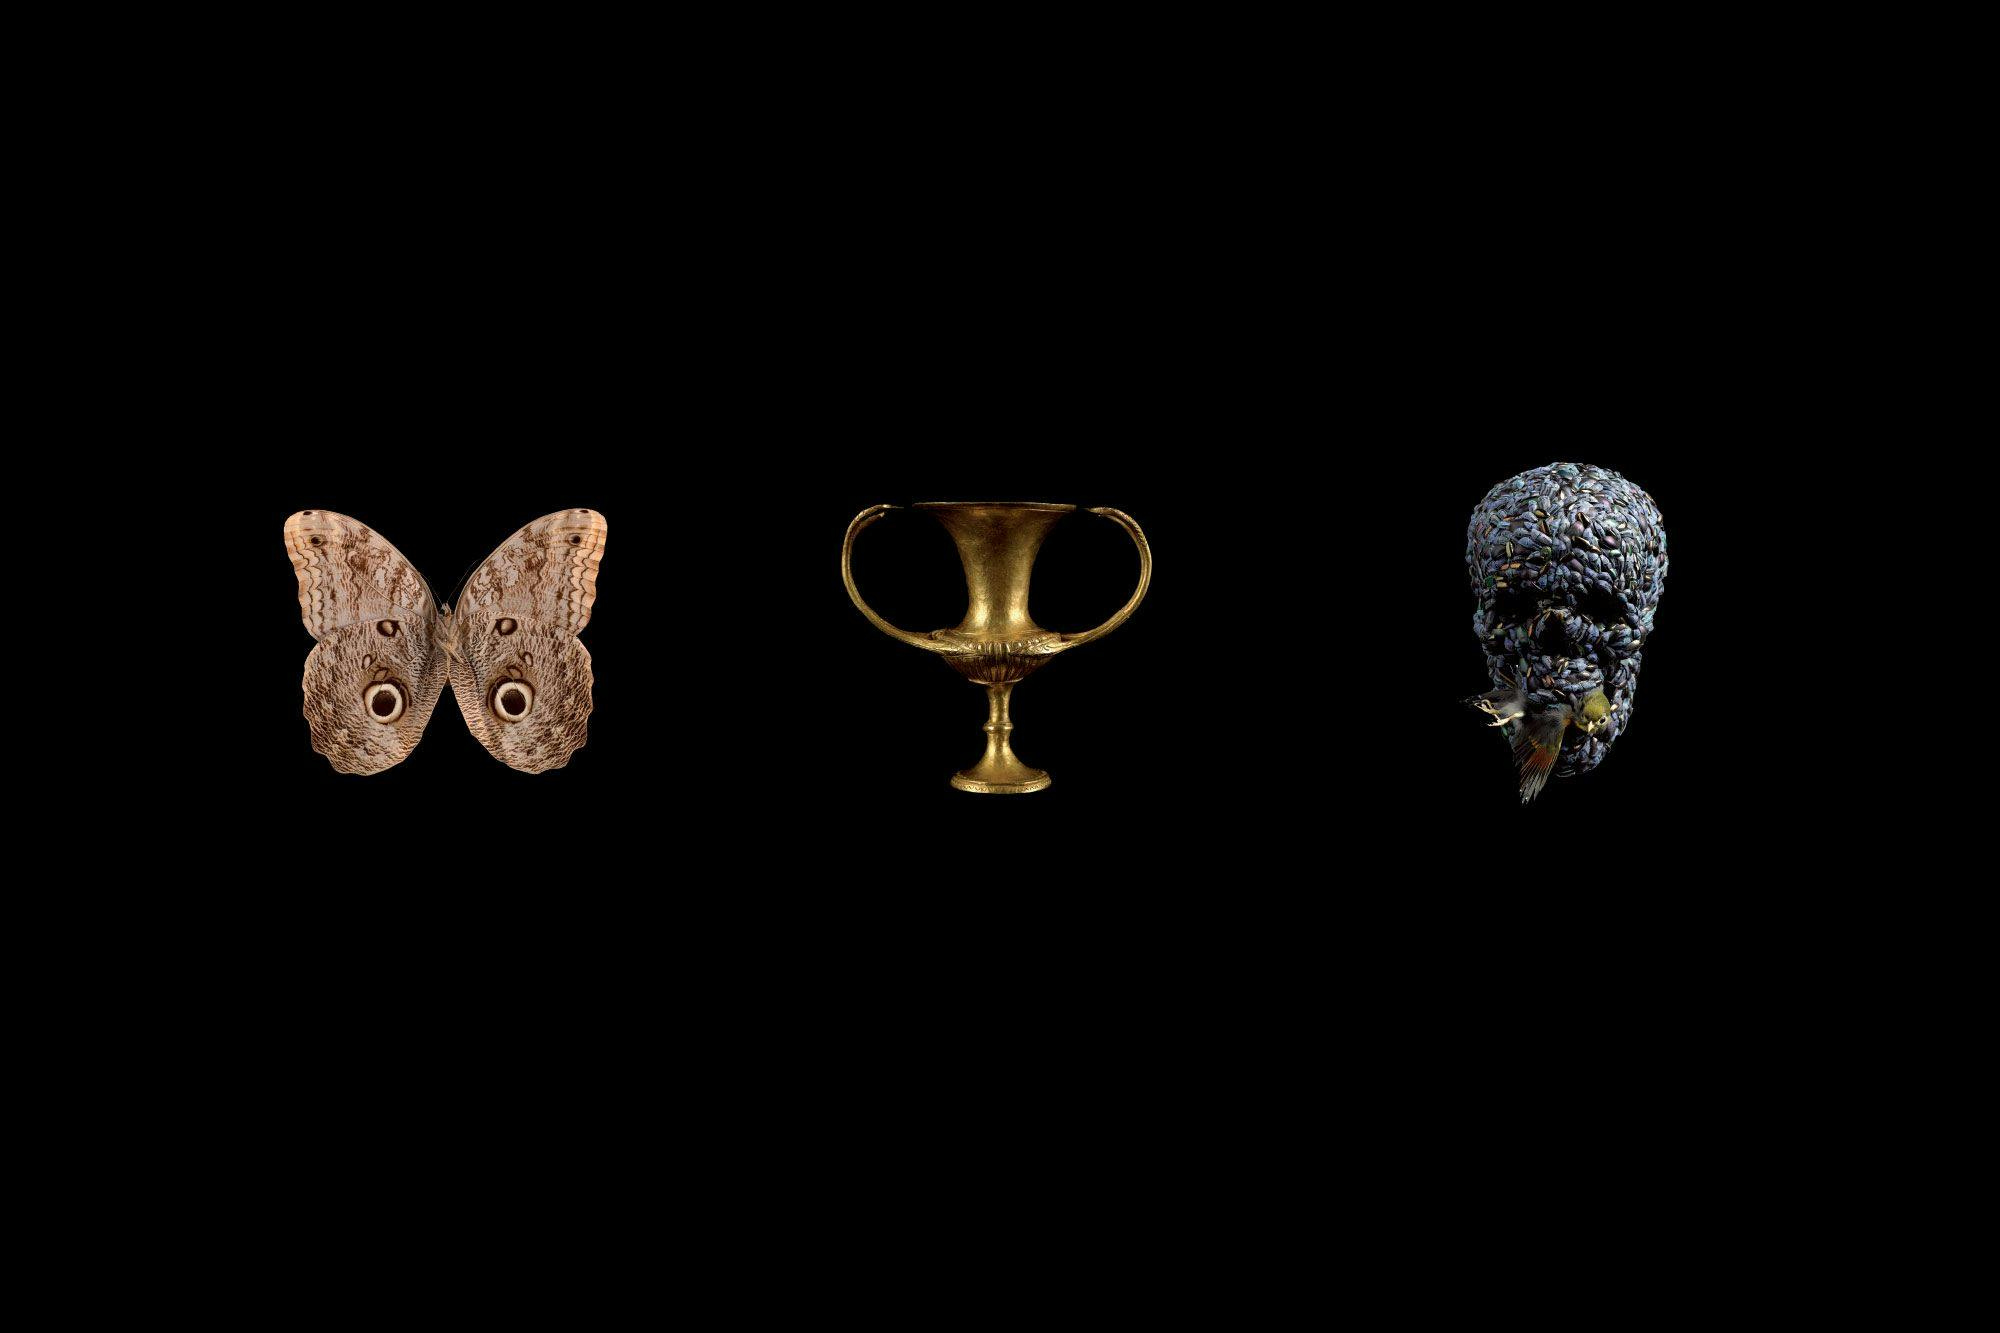 A Butterfly, a Greek vase and a skull made of feathers eating a bird.